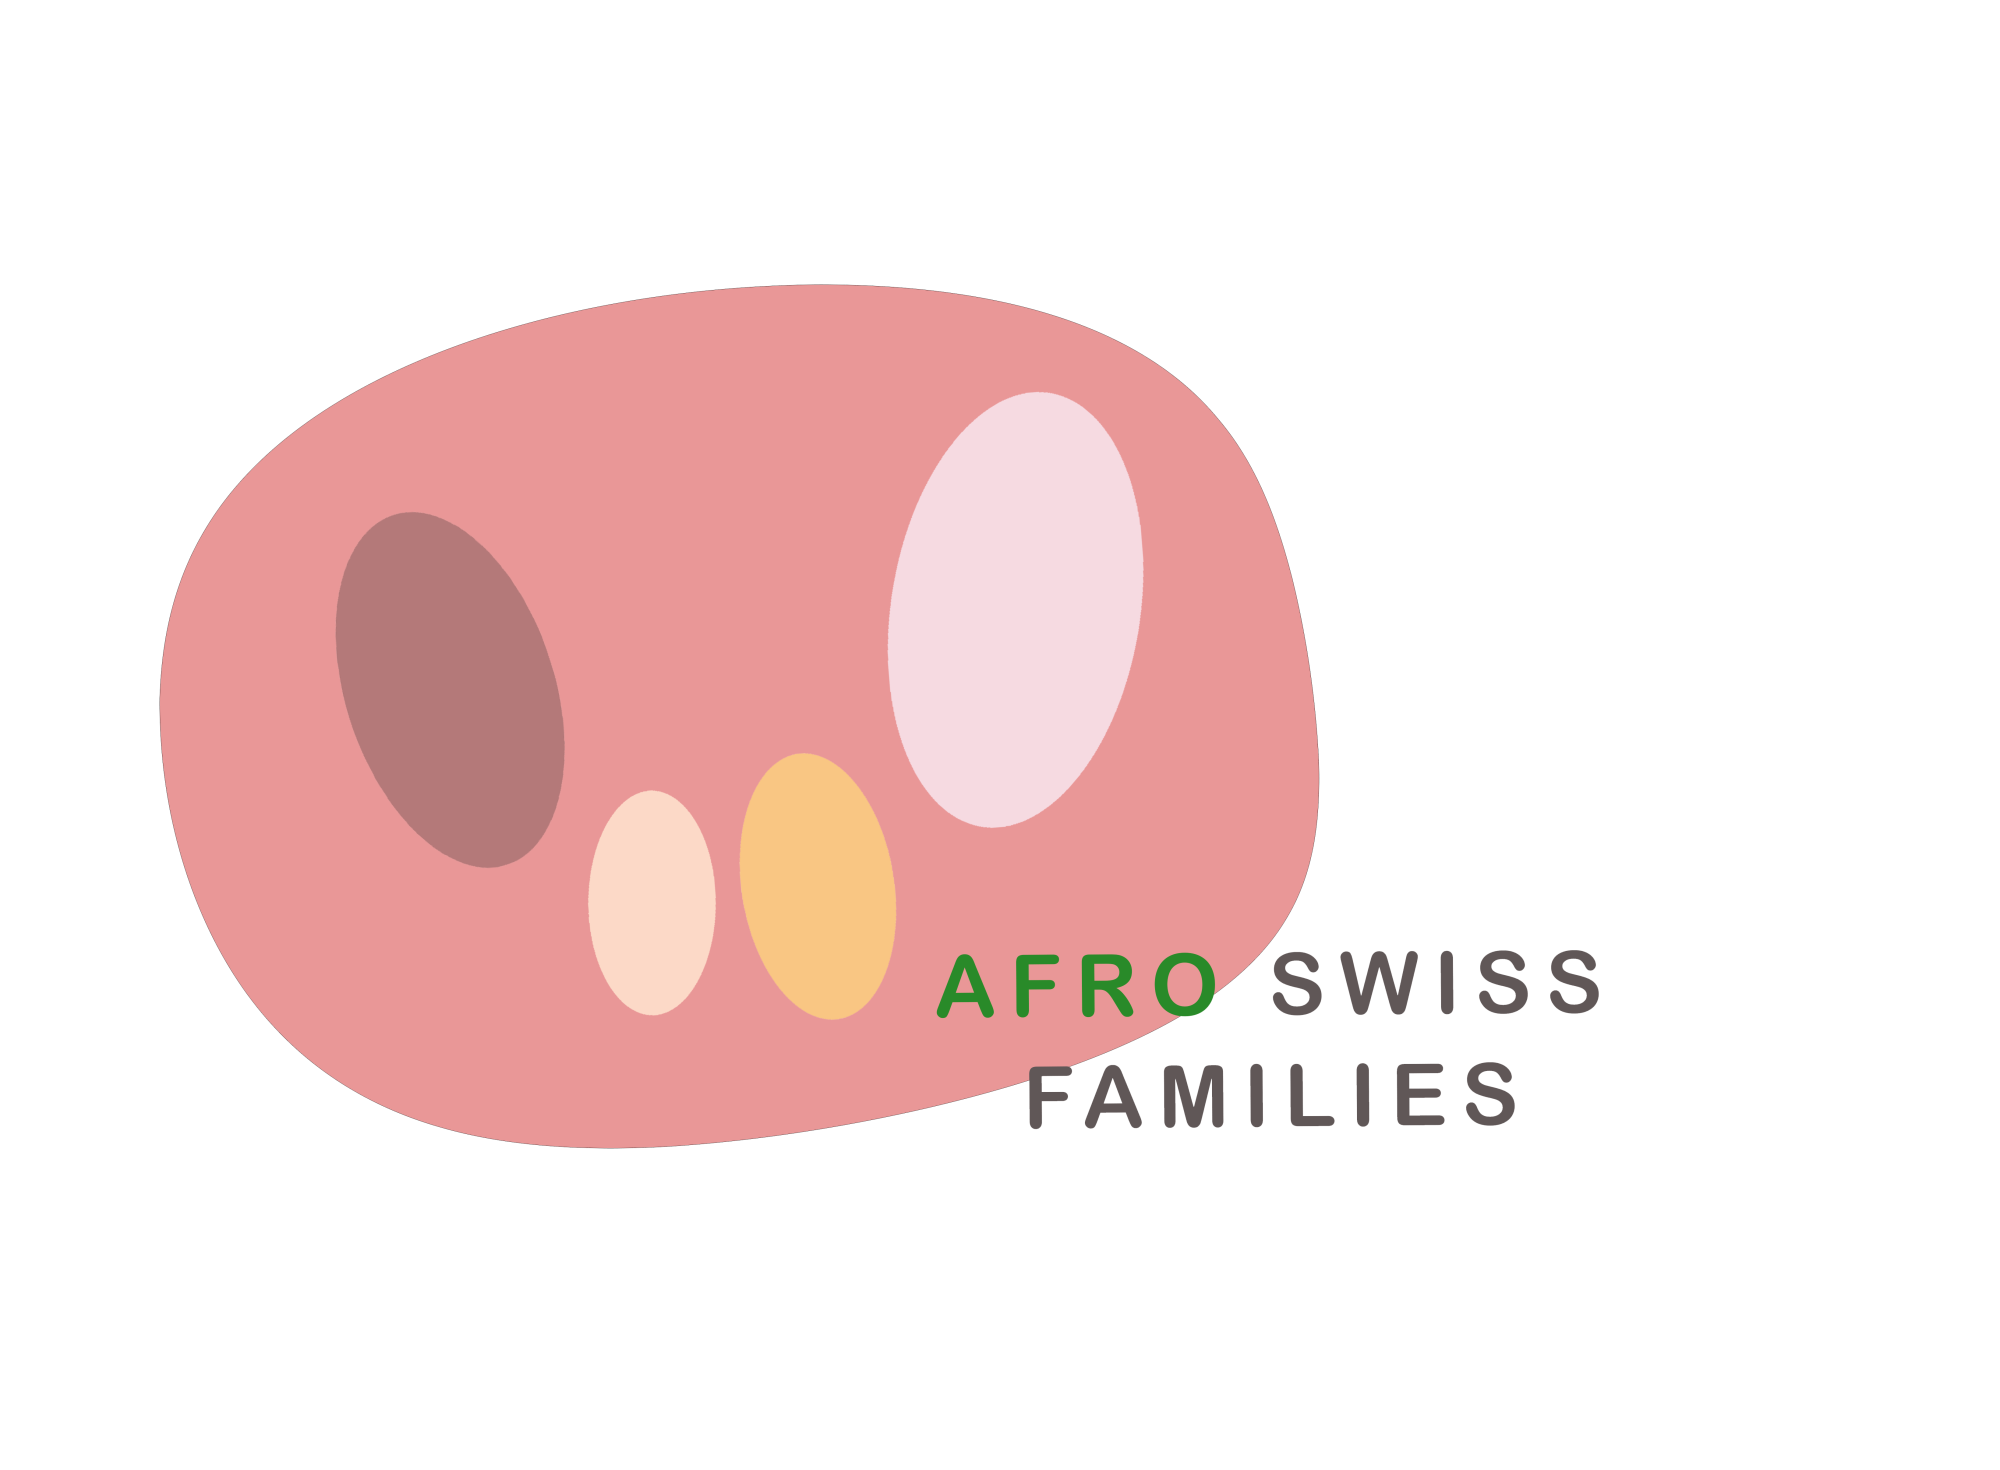 Afro Swiss Families